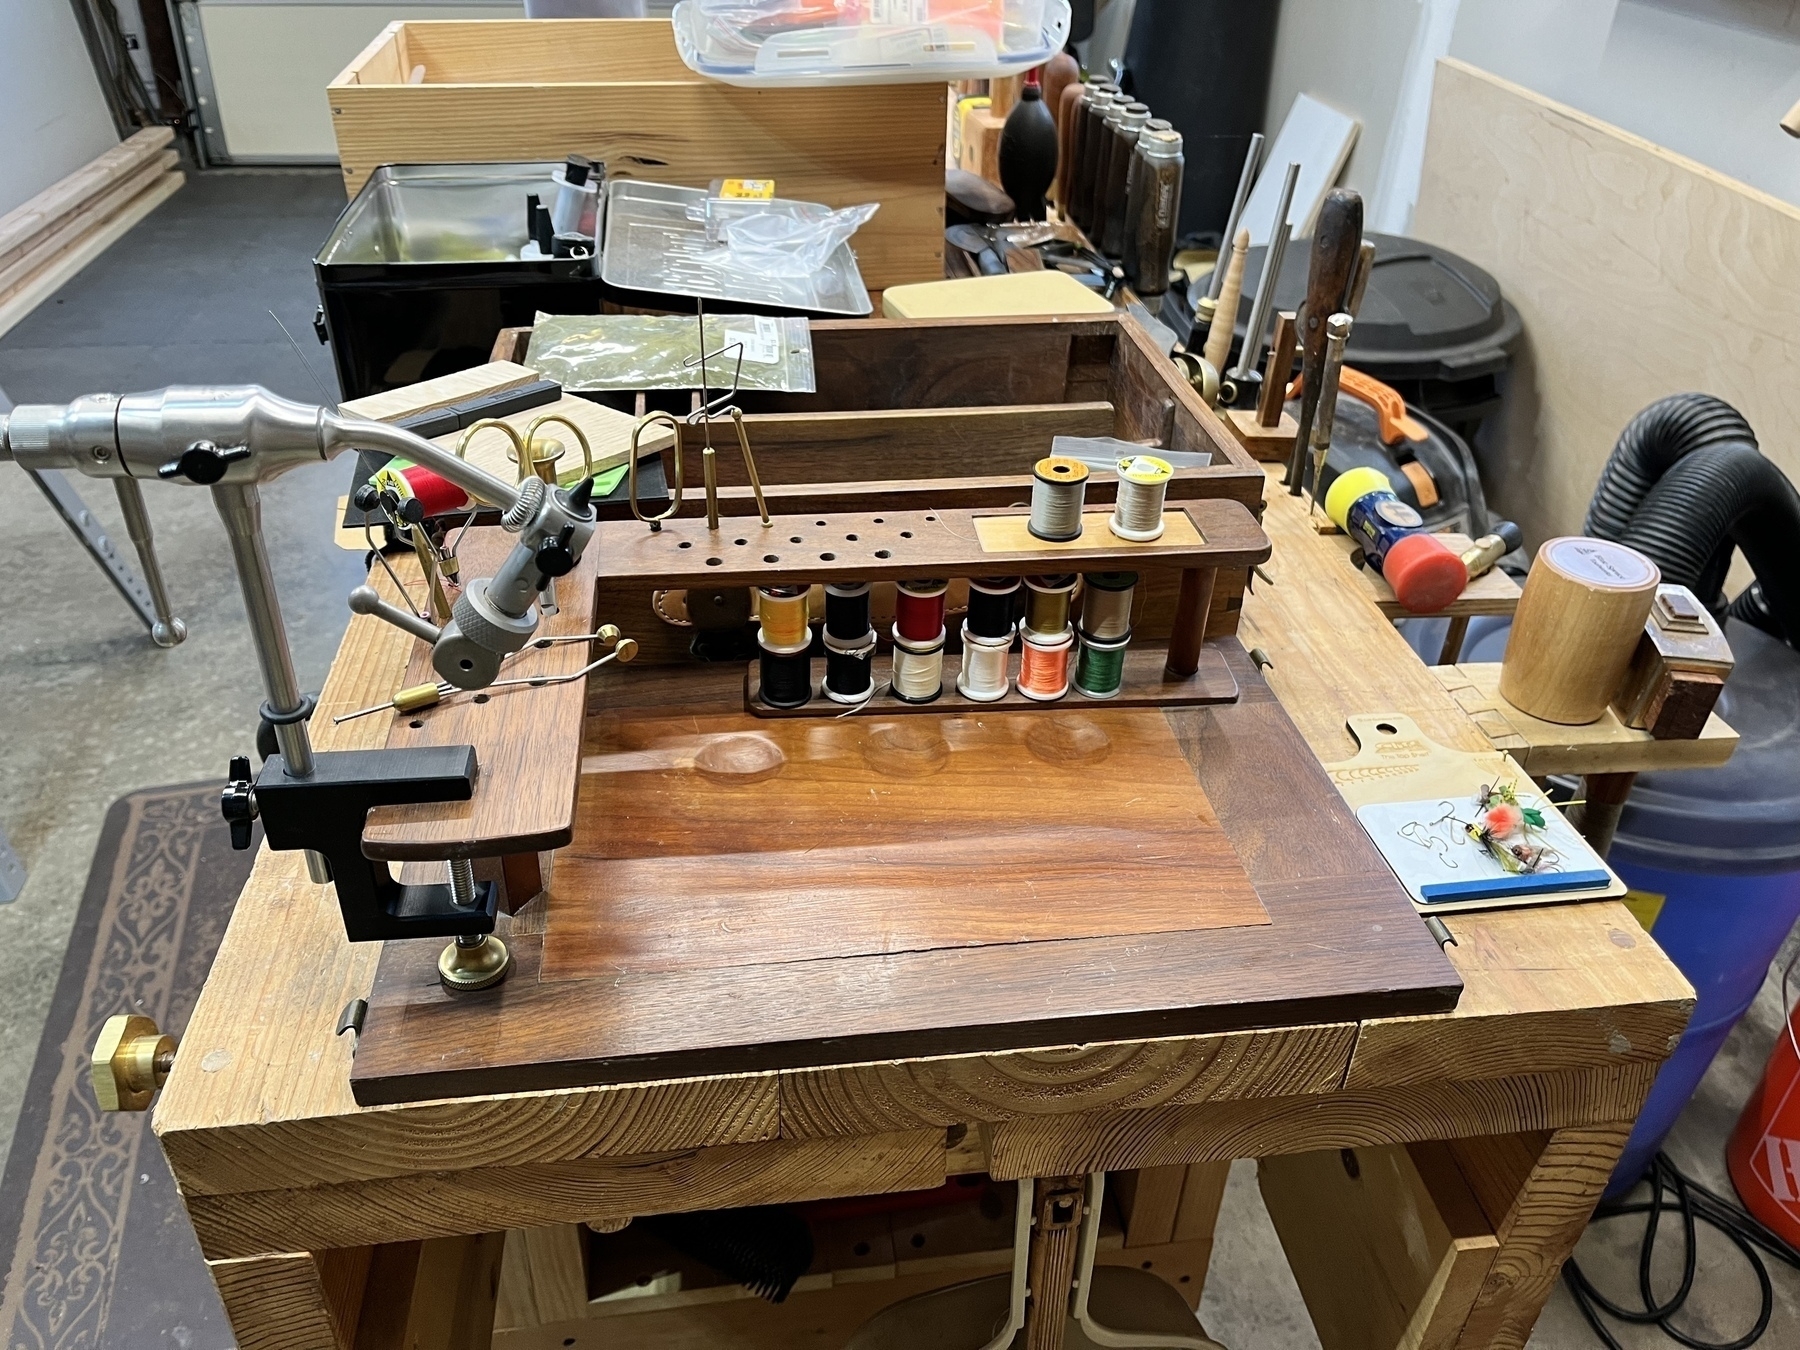 A fly tying station features various tools, spools of thread, and organized compartments on a wooden woodworking workbench.